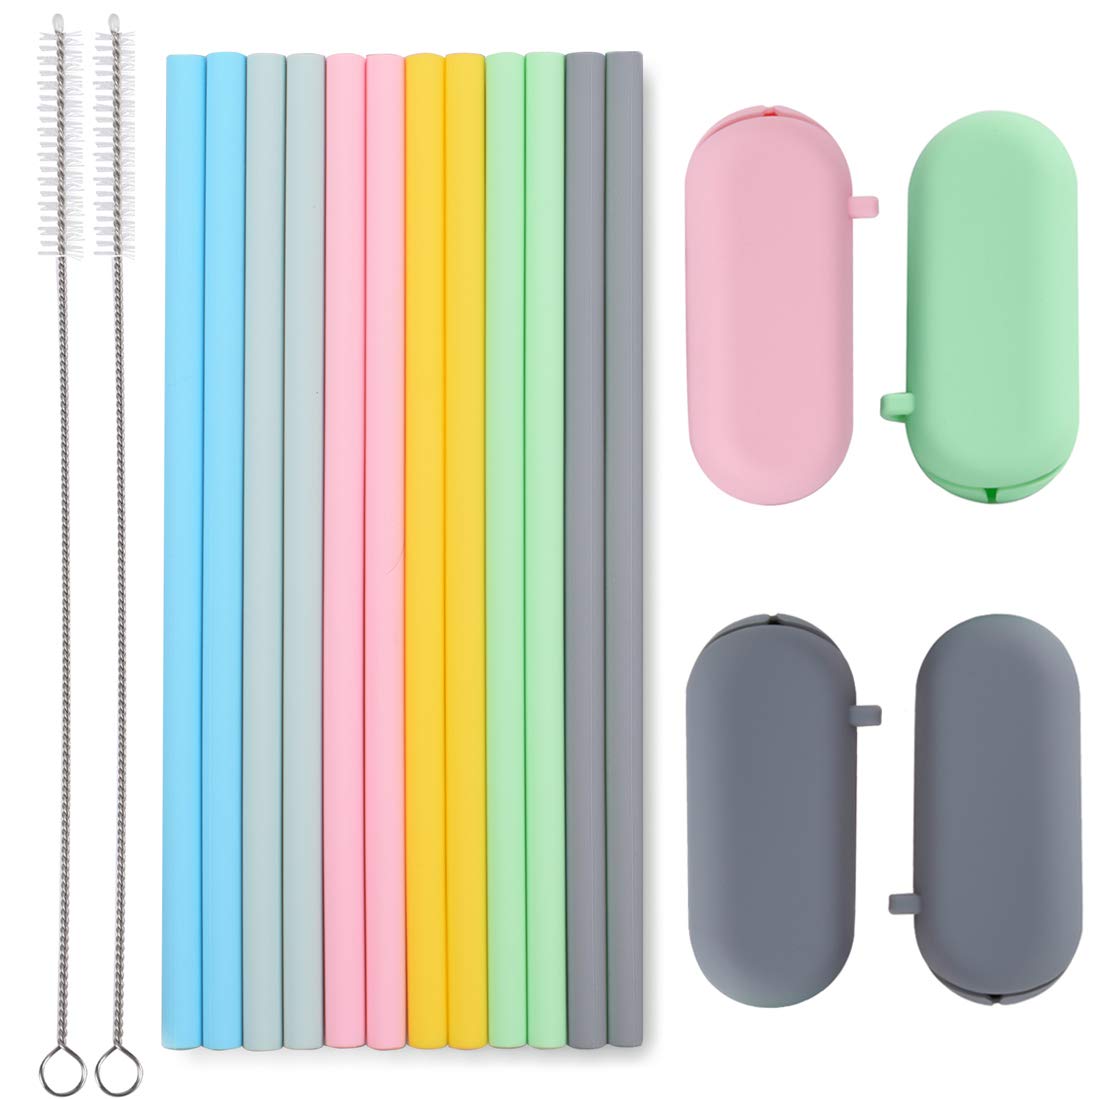 Sunseeke Reusable Straws Silicone Straws Set - Odorless, 12 Standard  Drinking Straws, 4 Carry Pouch, 2 Cleaning Brushes, Certificated Food Grade  Platinum Silicone - 8 1/2 Long